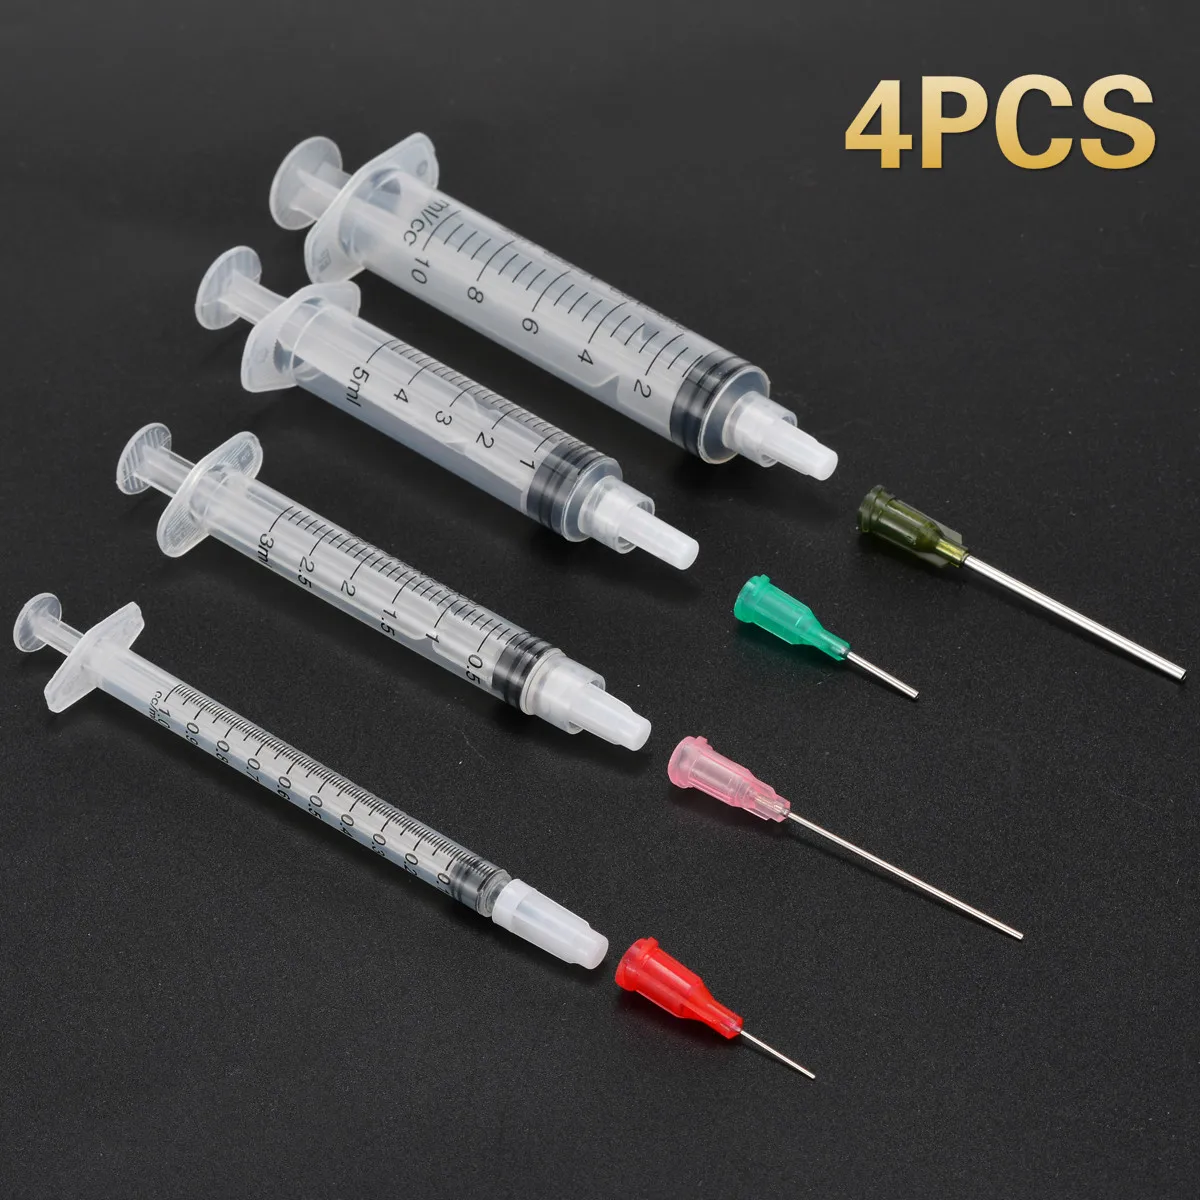 

12pcs/set 1ml 3ml 5ml 10ml Syringes with 4pcs 14G-25G Blunt Tip Needles and Caps For Industrial Dispensing Syringe